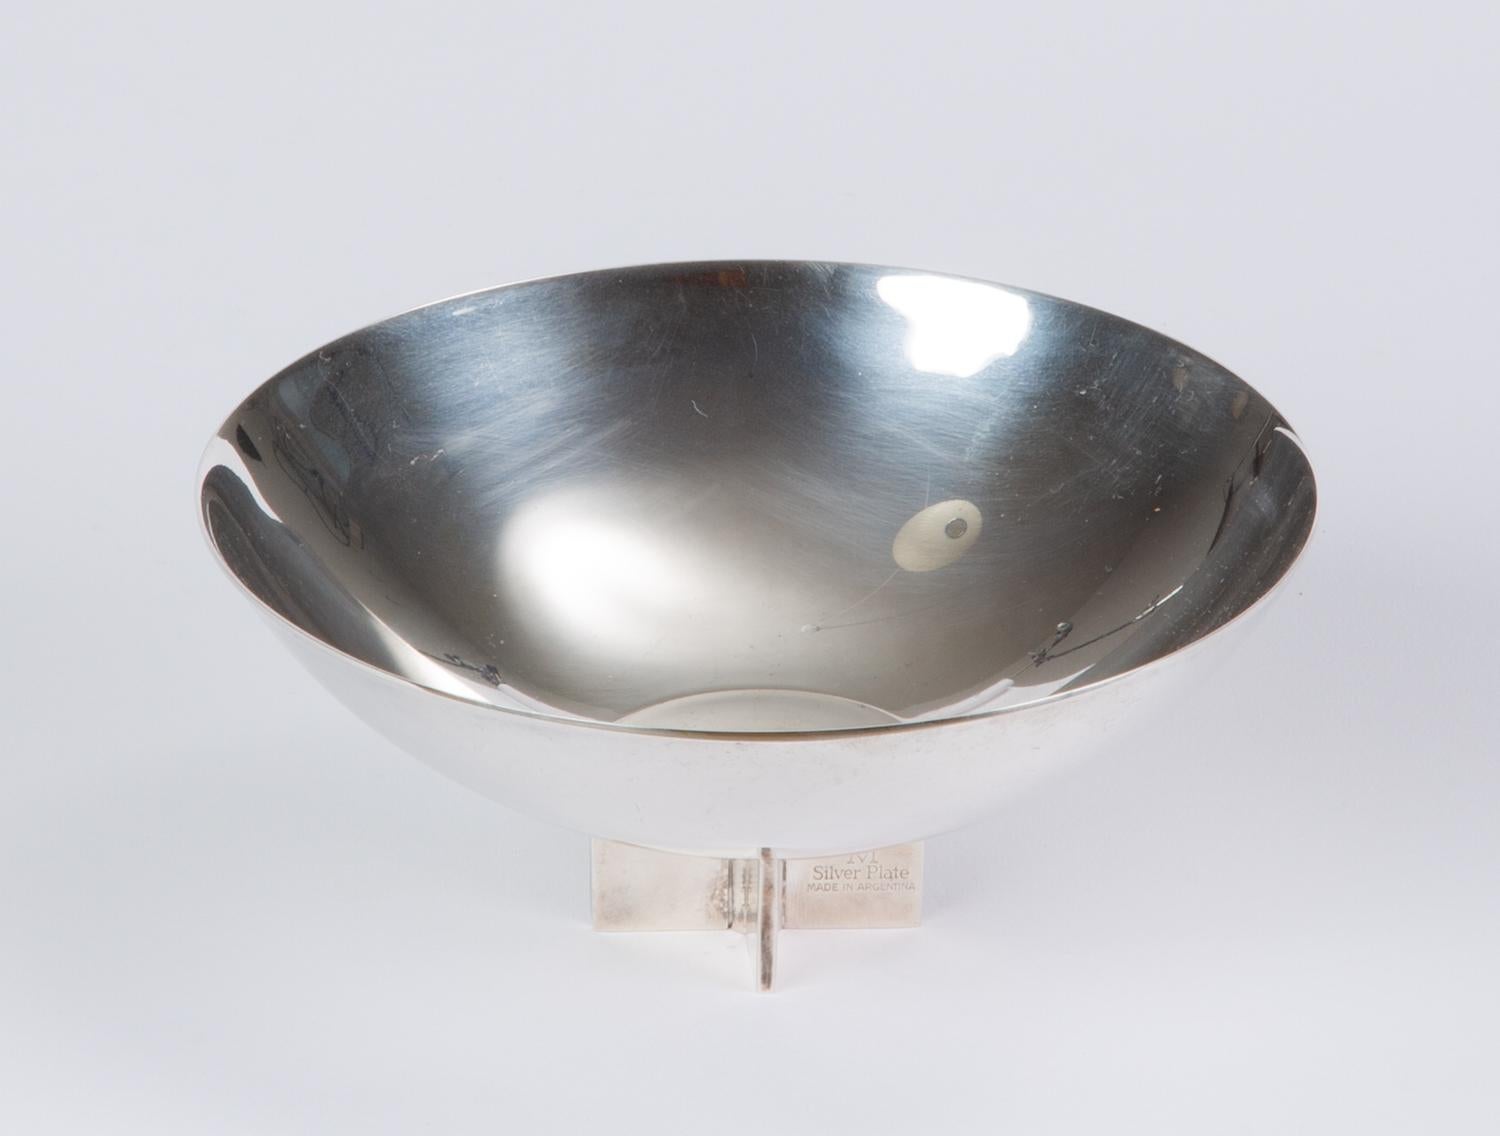 Late 20th Century Postmodern Silver Bowl by Richard Meier for Swid Powell